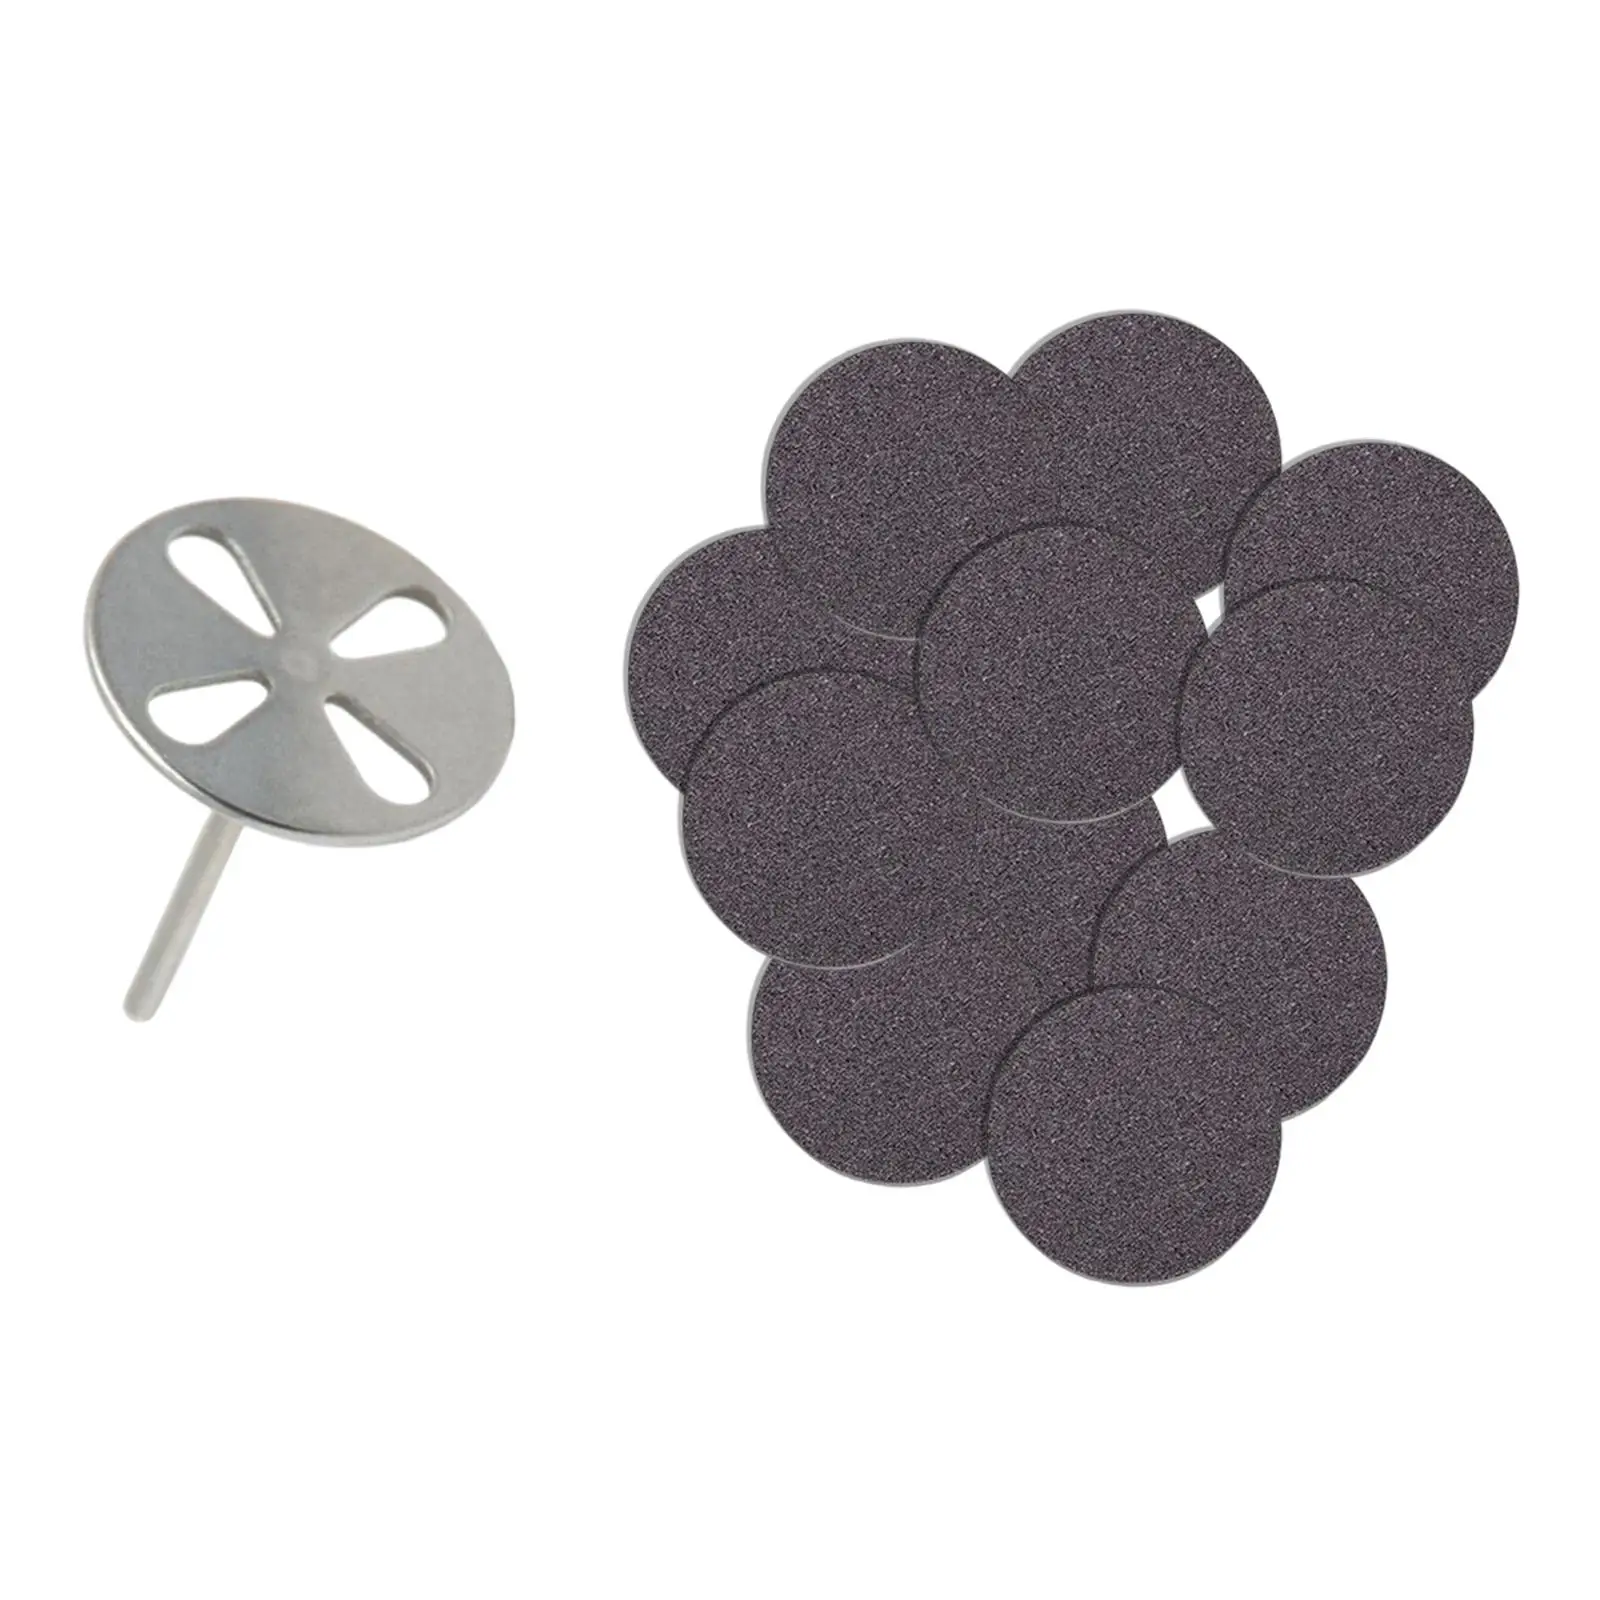 100Pcs 25mm Sand Papers Discs Sandpaper Replaceable Pads for Electric Foot File Dead Skin Quick Shortening Nails Tool Hard Skin